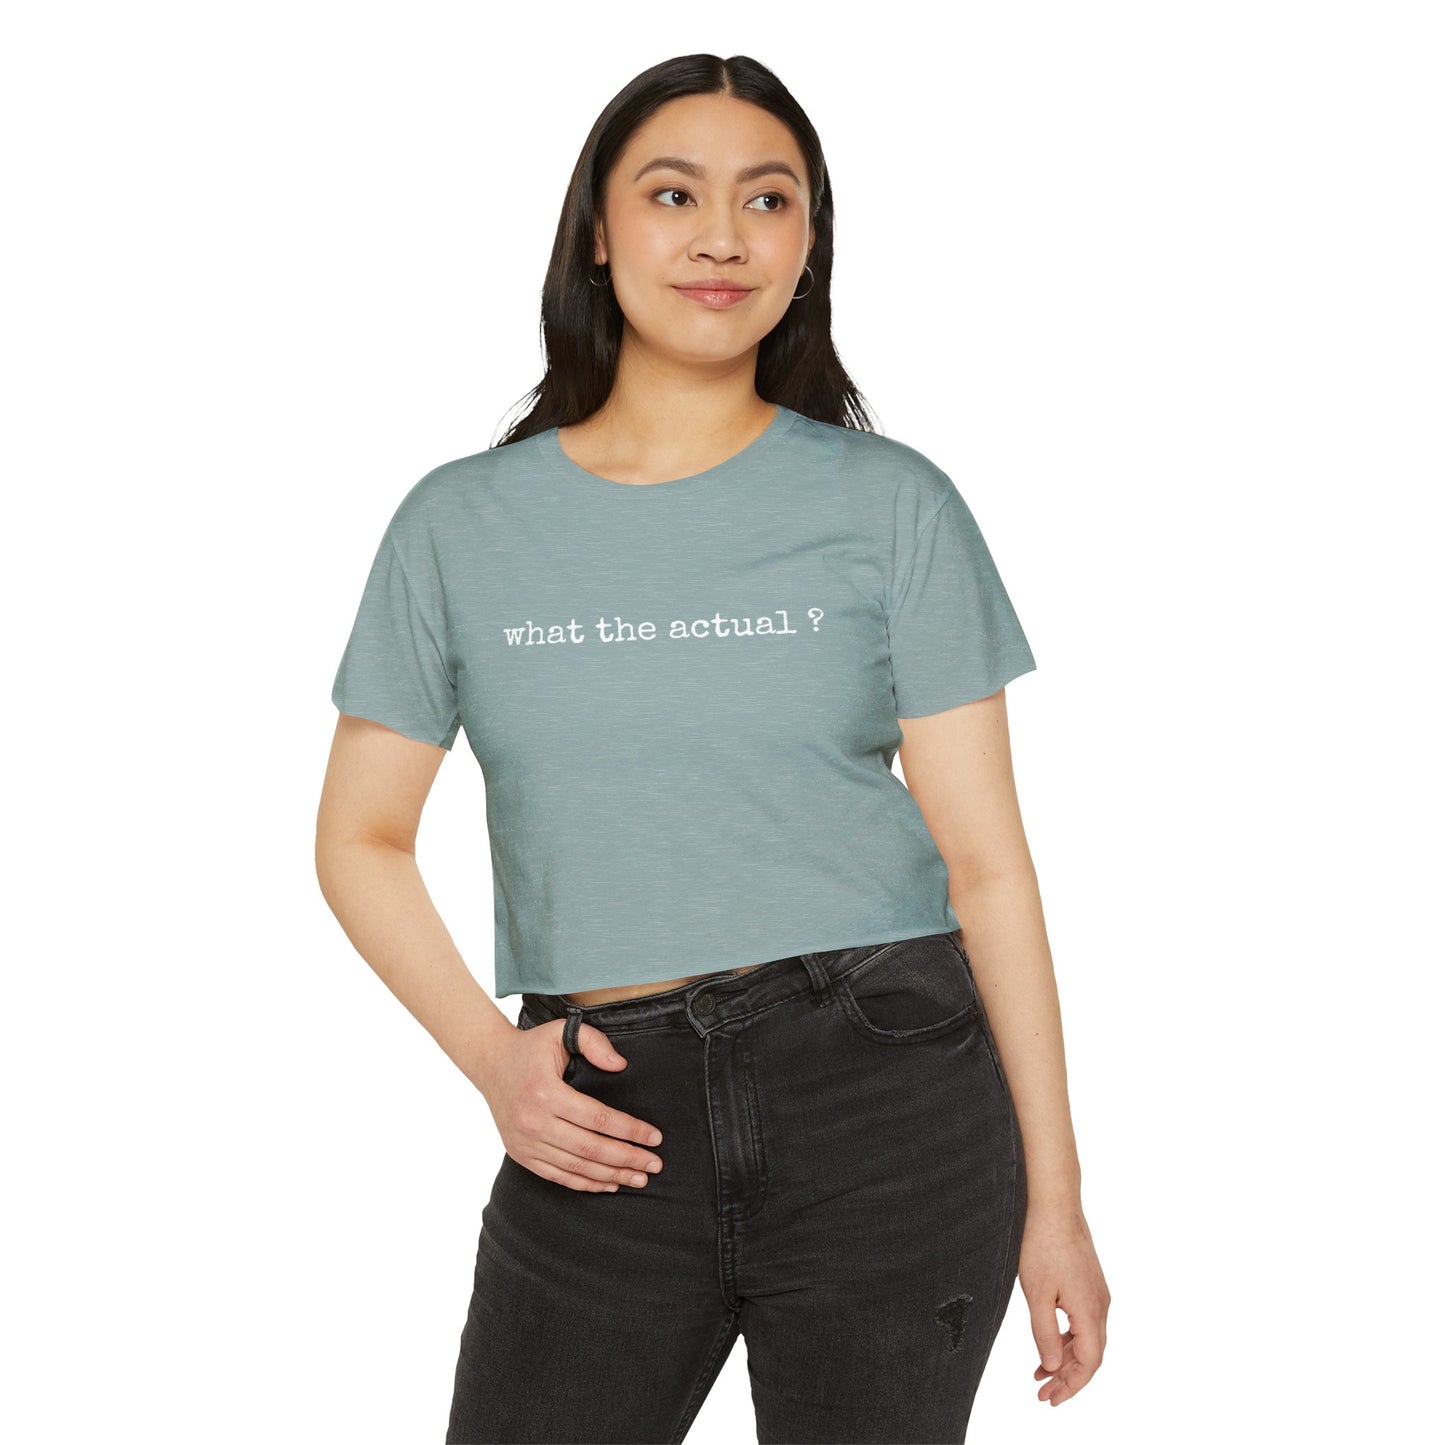 What the actual ? Cropped Tee